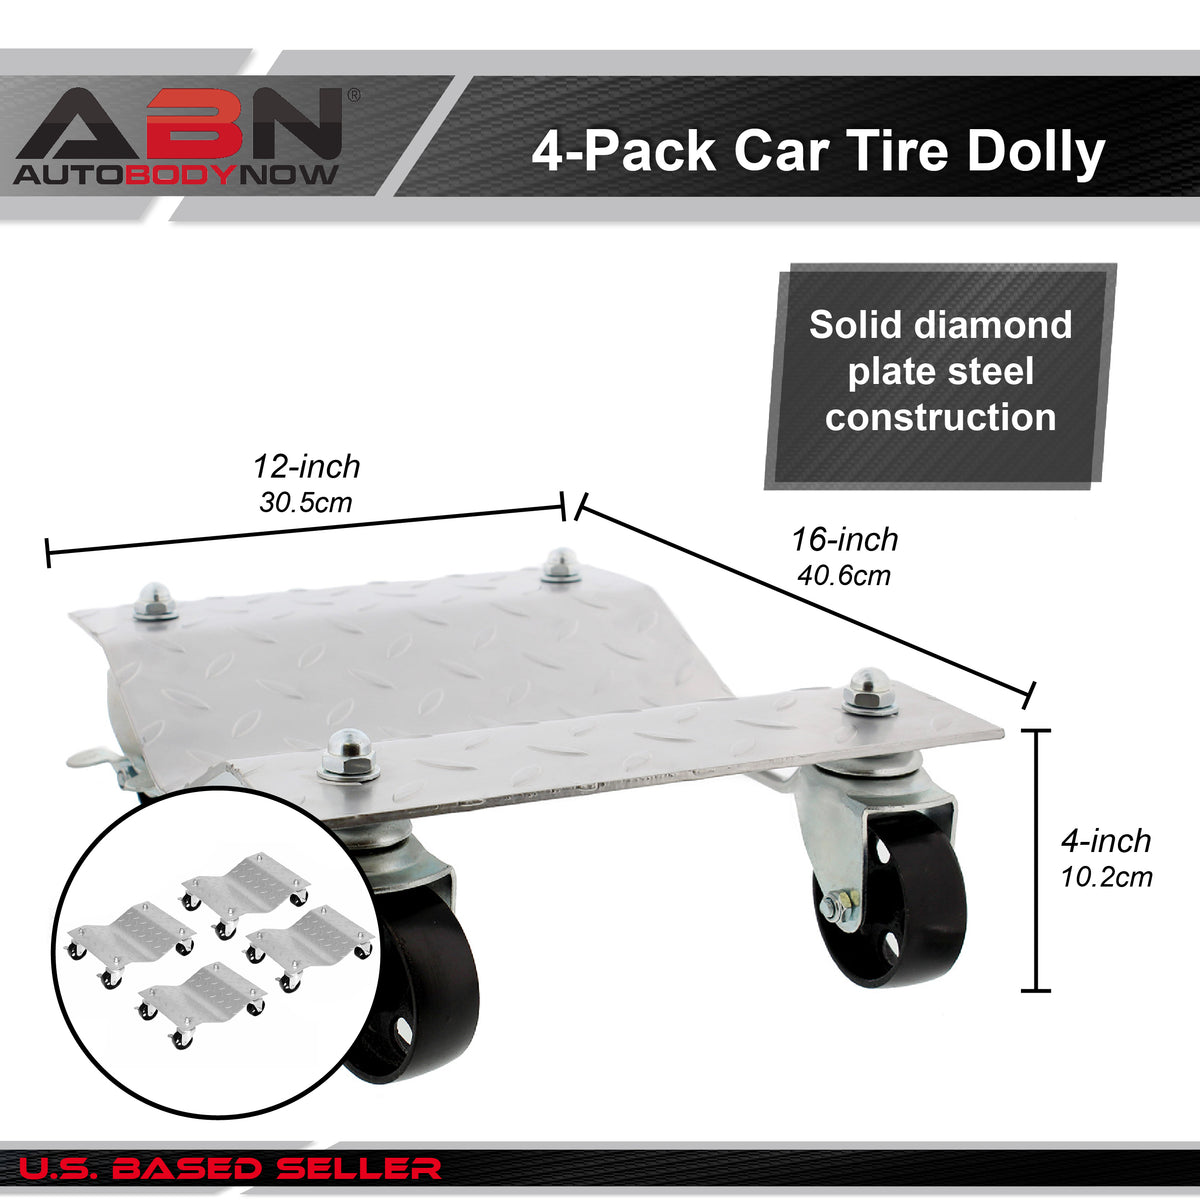 Car Tire Dolly 4-Pack Stake Dollies Set 6,000 lbs pound 4 Wheel Dolly